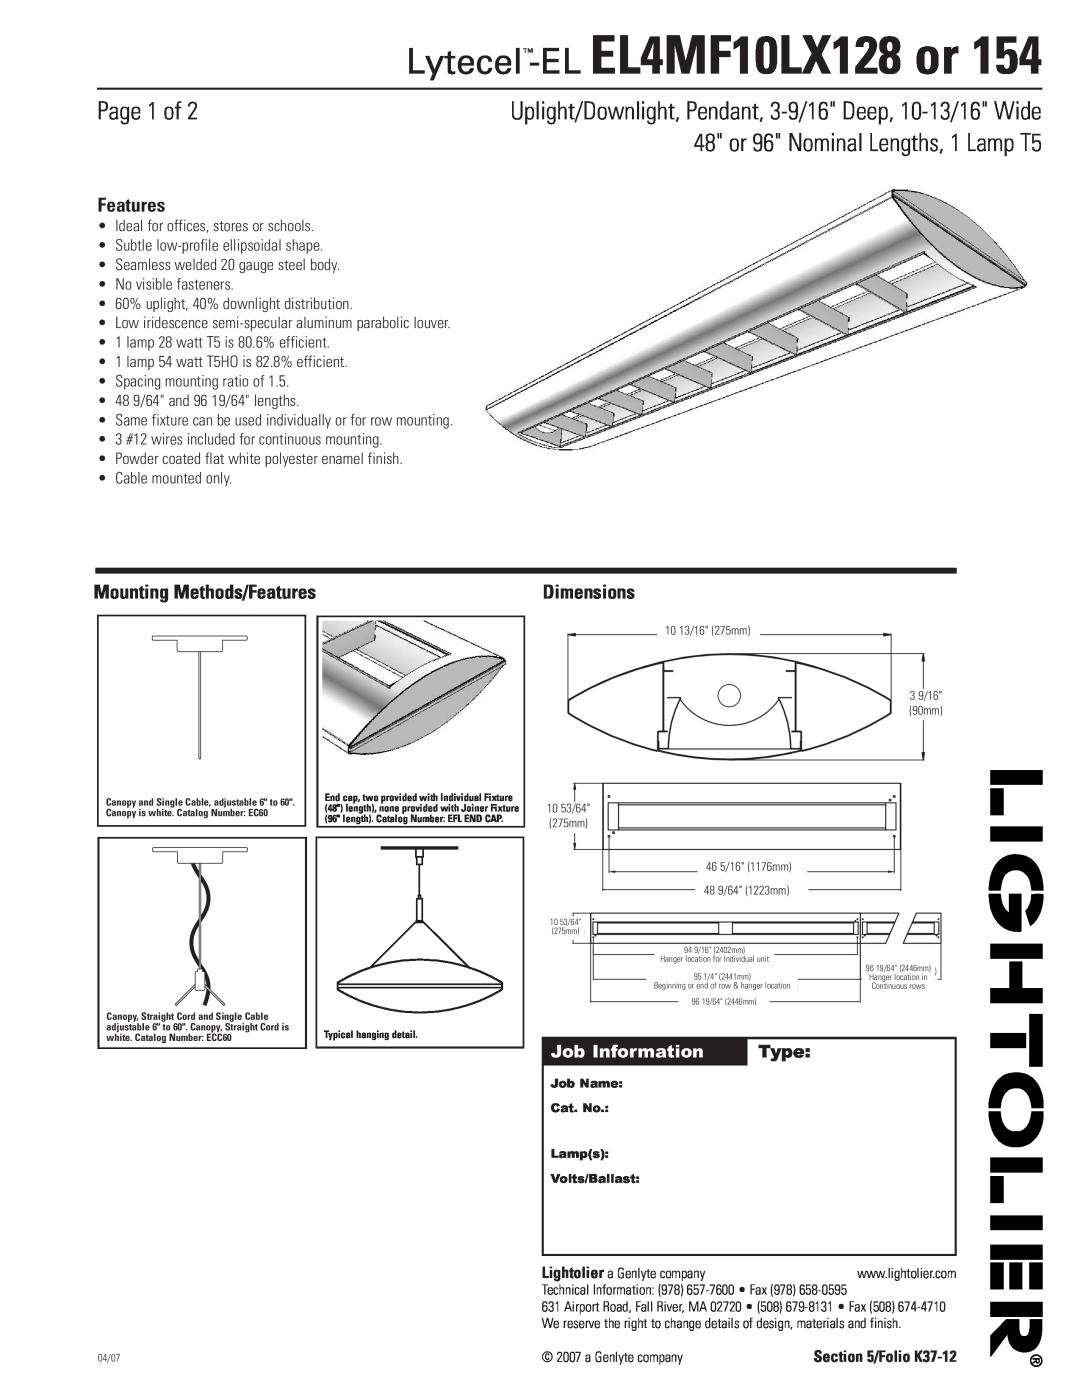 Lightolier EL4MF10LX154 dimensions Page 1 of, 48 or 96 Nominal Lengths, 1 Lamp T5, Job Information, Type, Features 